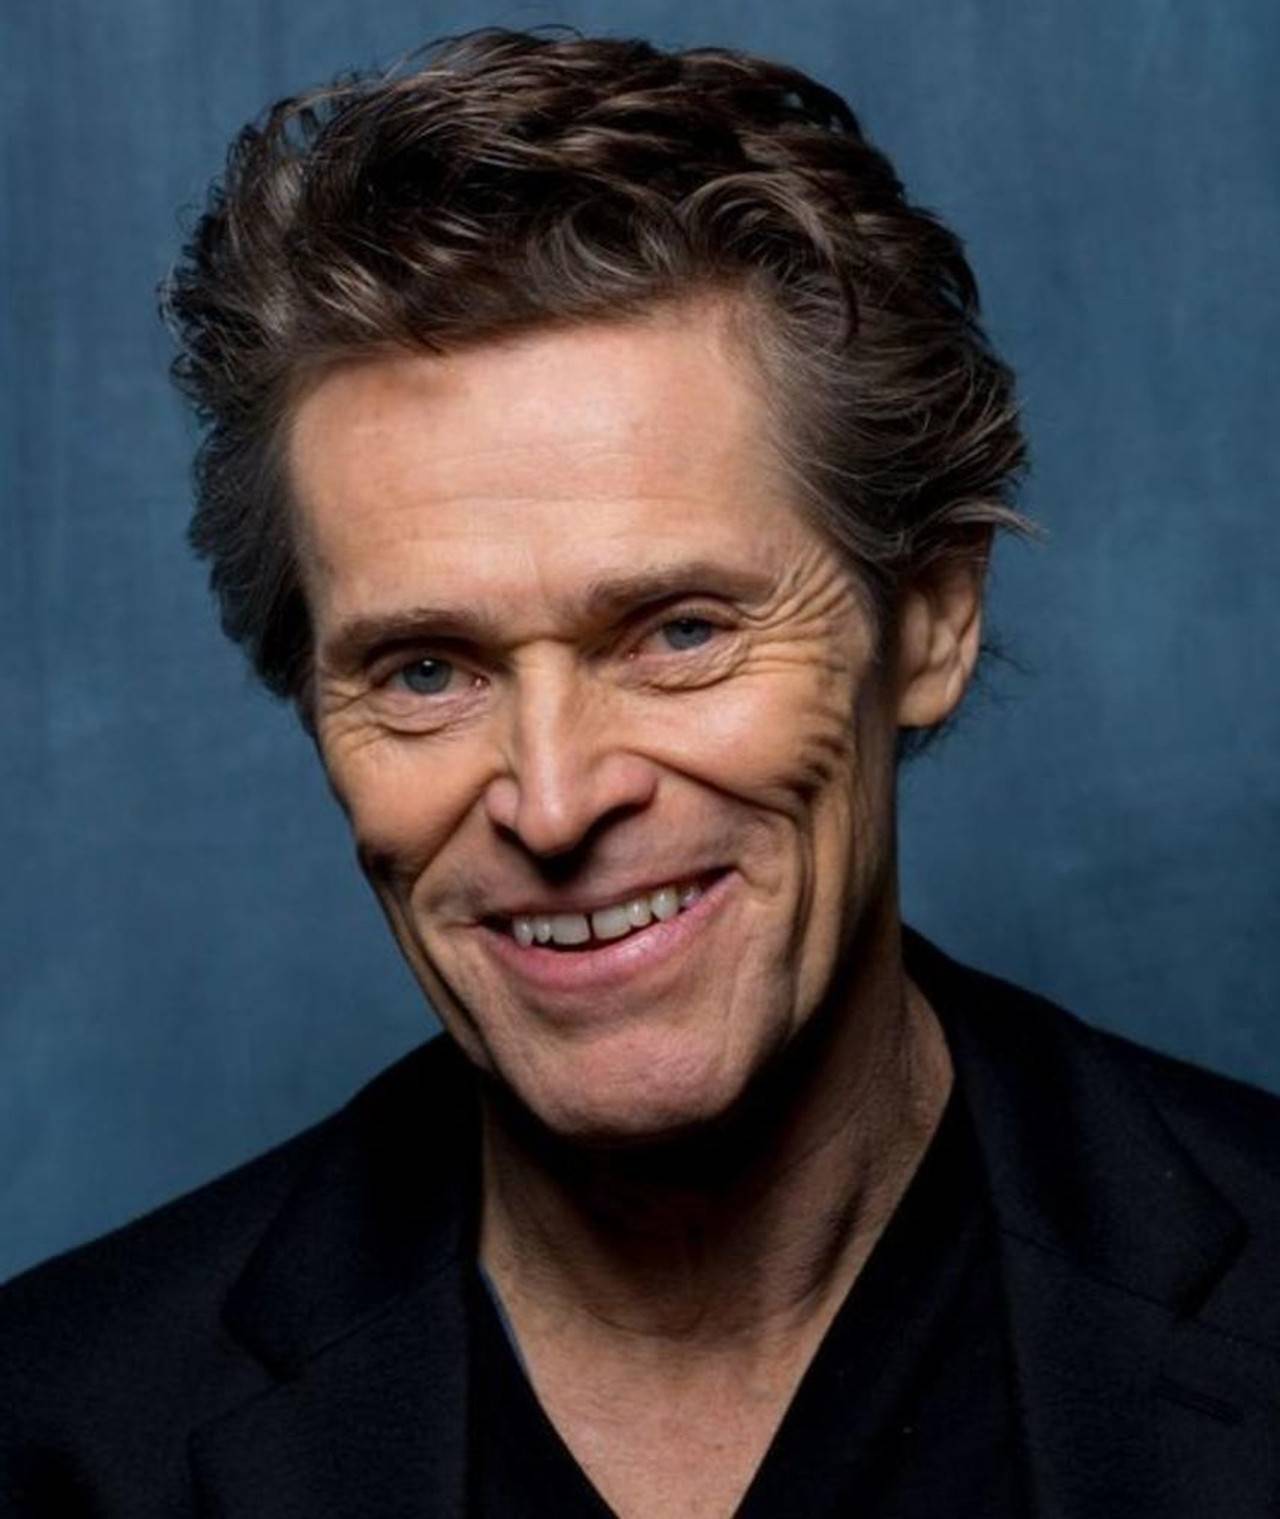 willem dafoe facts, fact about willem dafoe, willem dafoe young, young willem dafoe, 